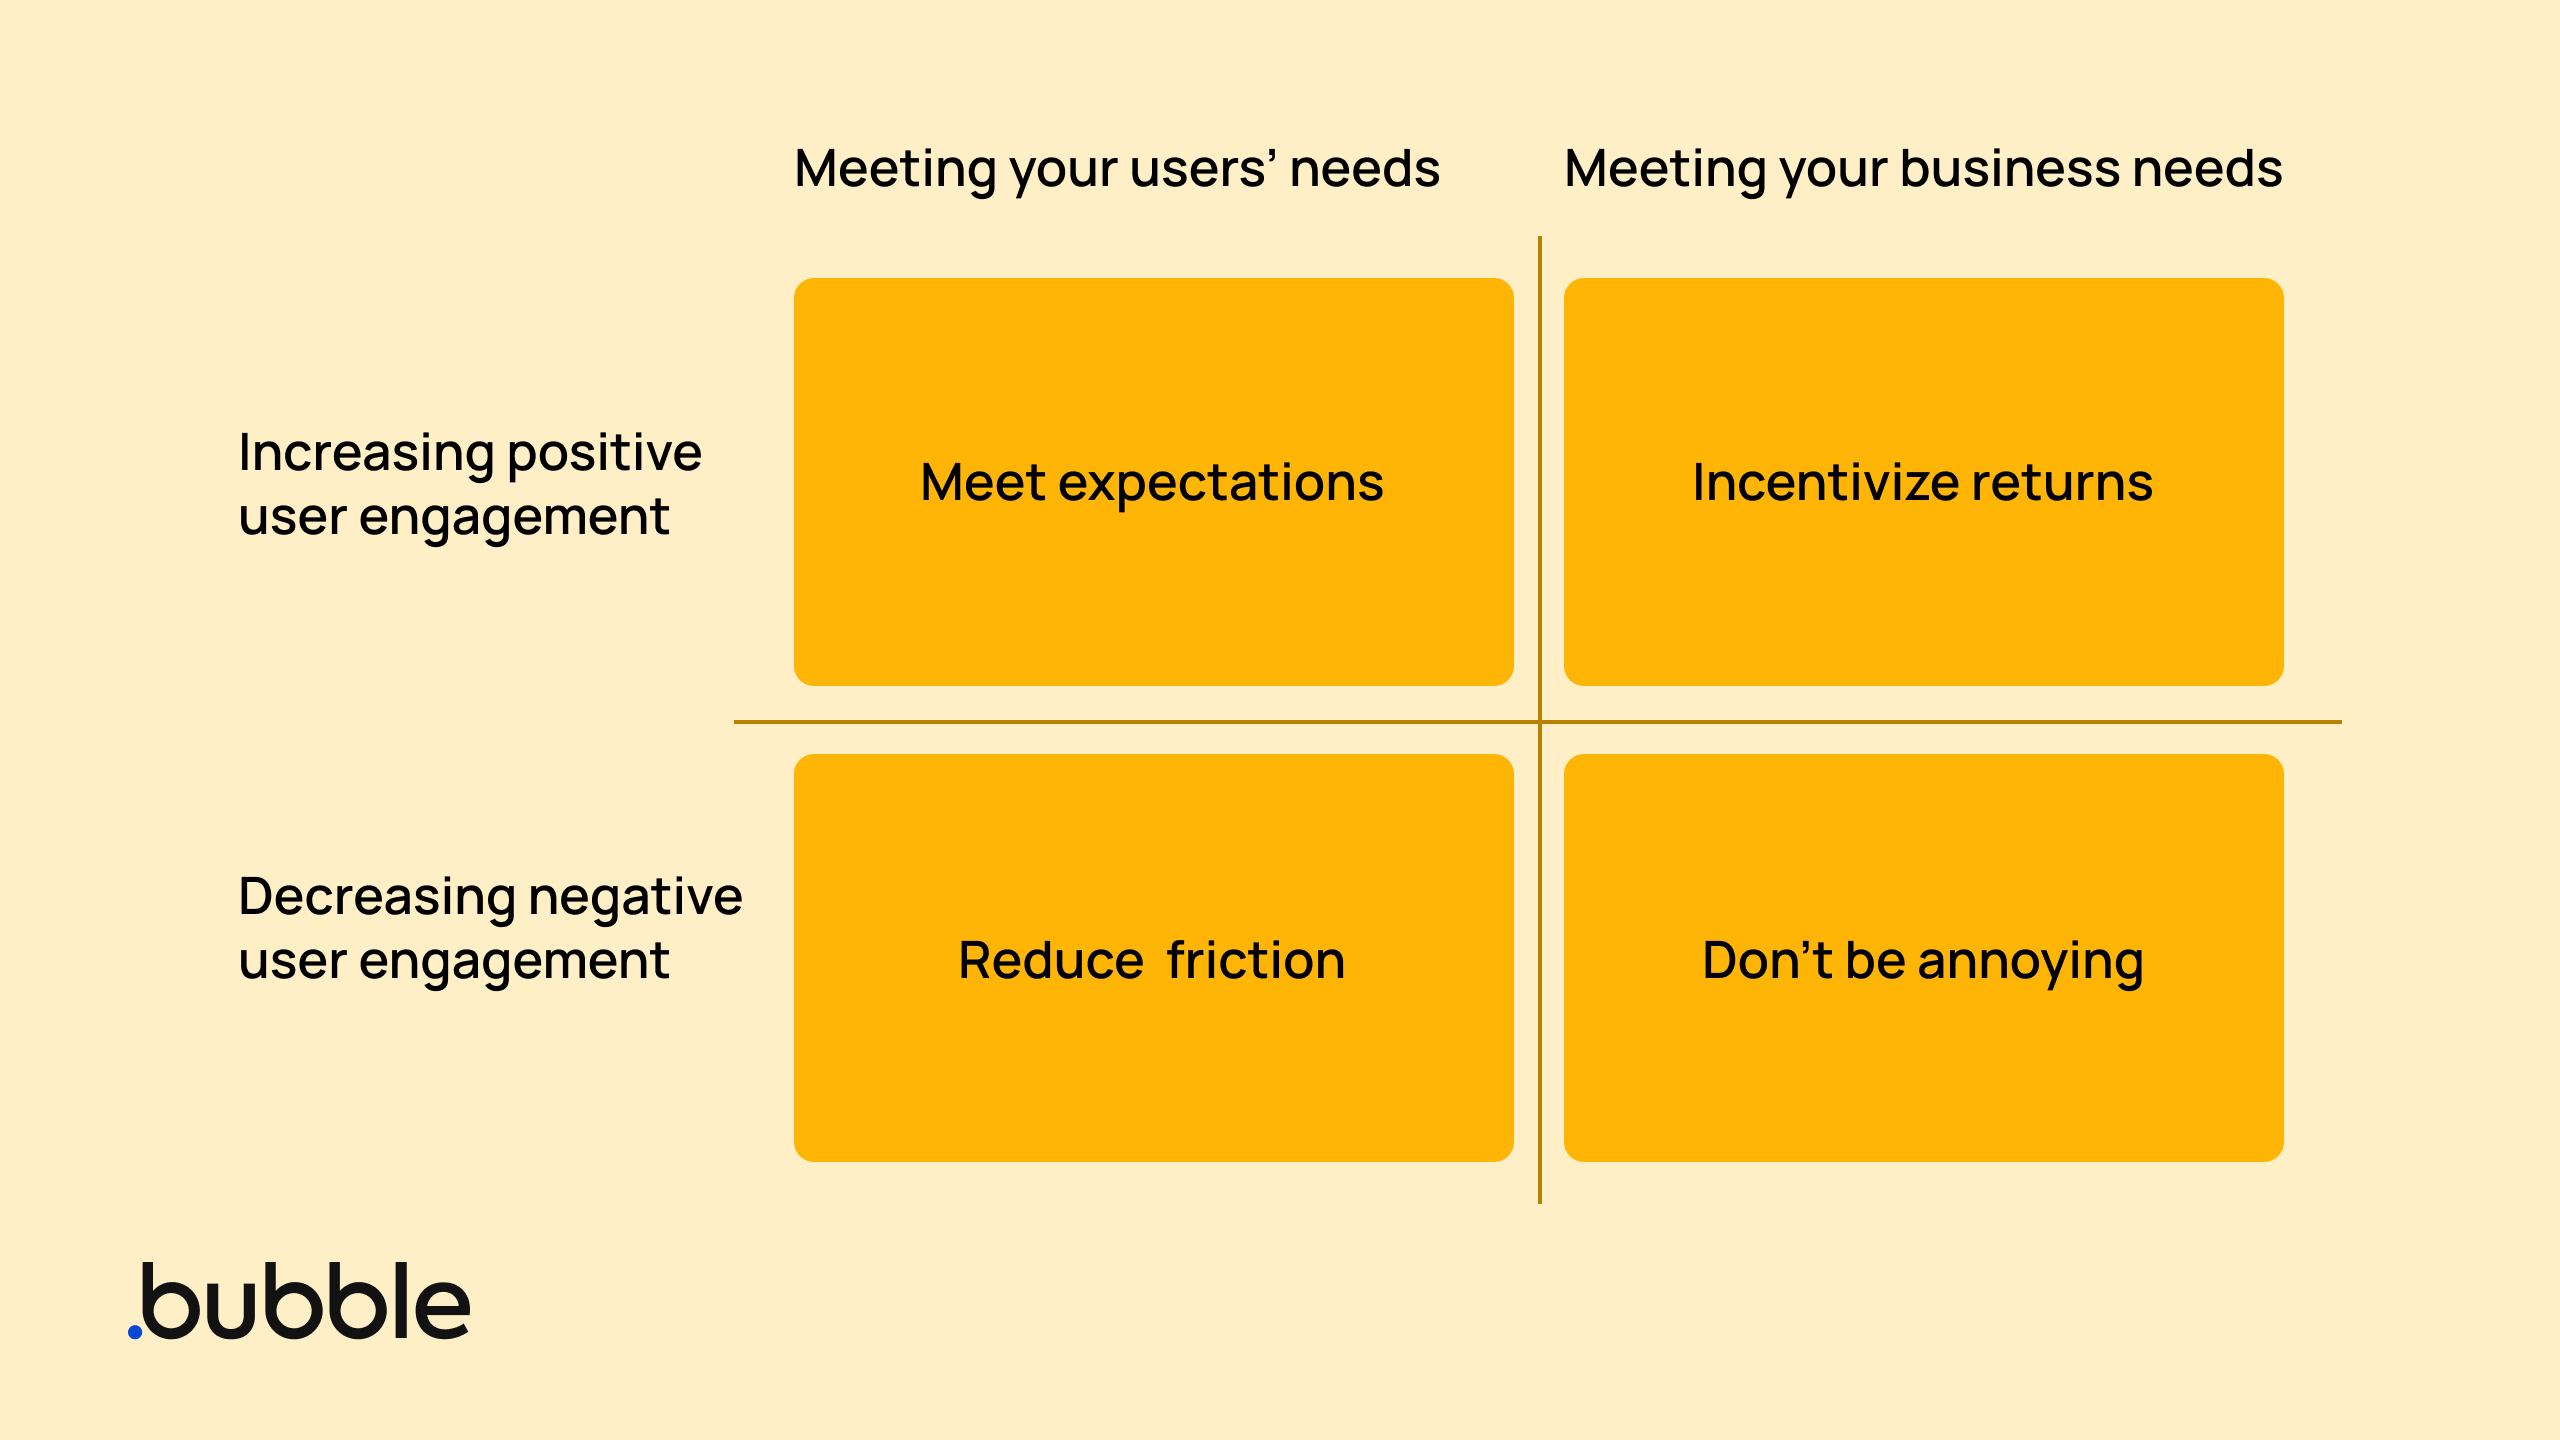 A 2x2 matrix illustrating how to meet user and business needs through positive/negative engagement.